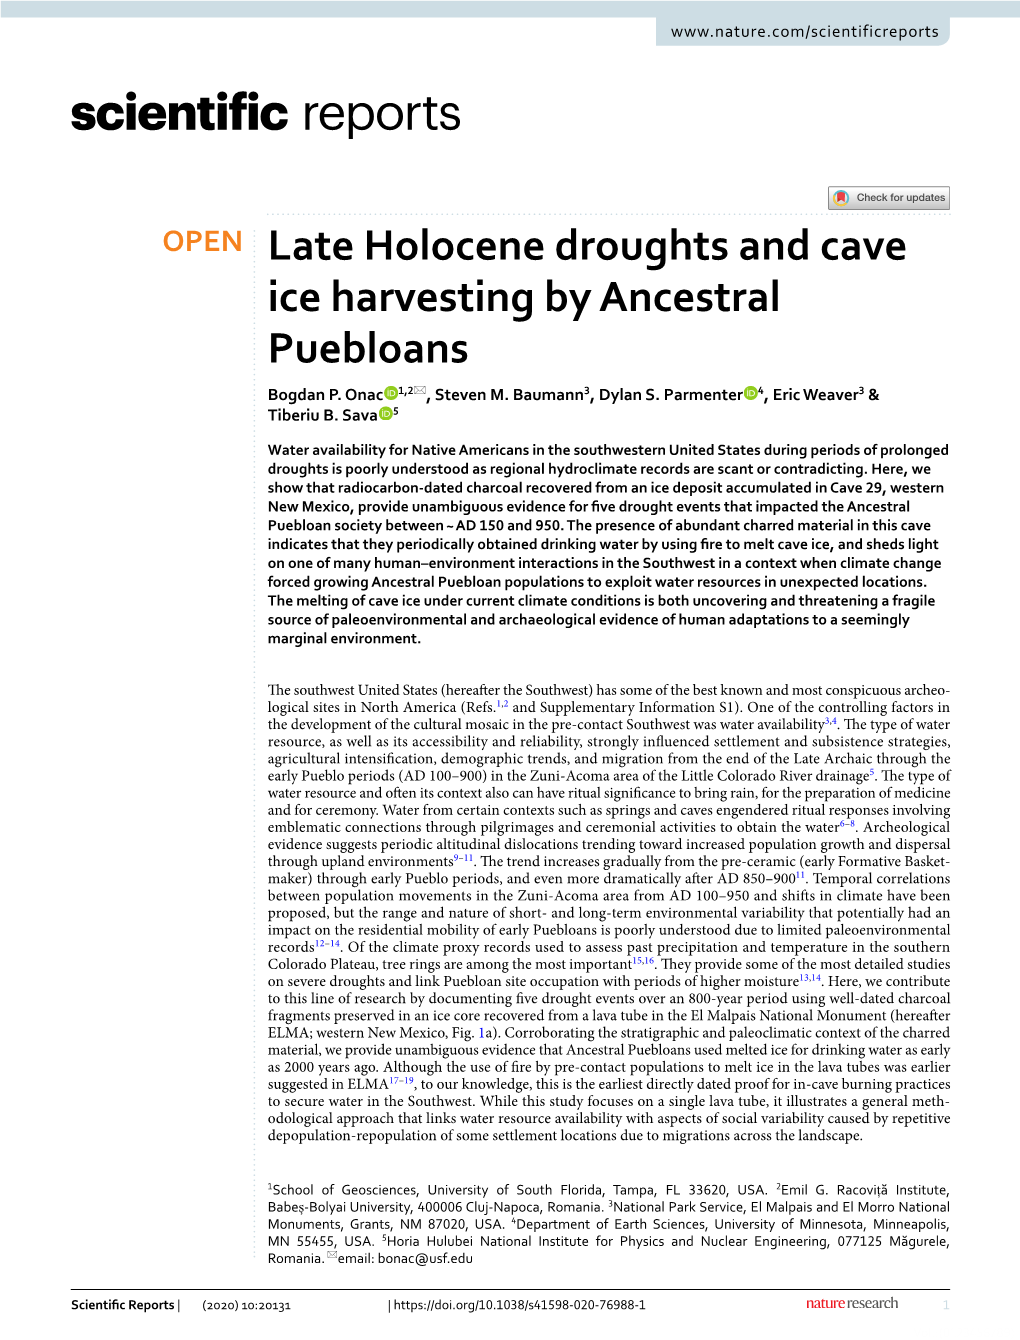 Late Holocene Droughts and Cave Ice Harvesting by Ancestral Puebloans Bogdan P